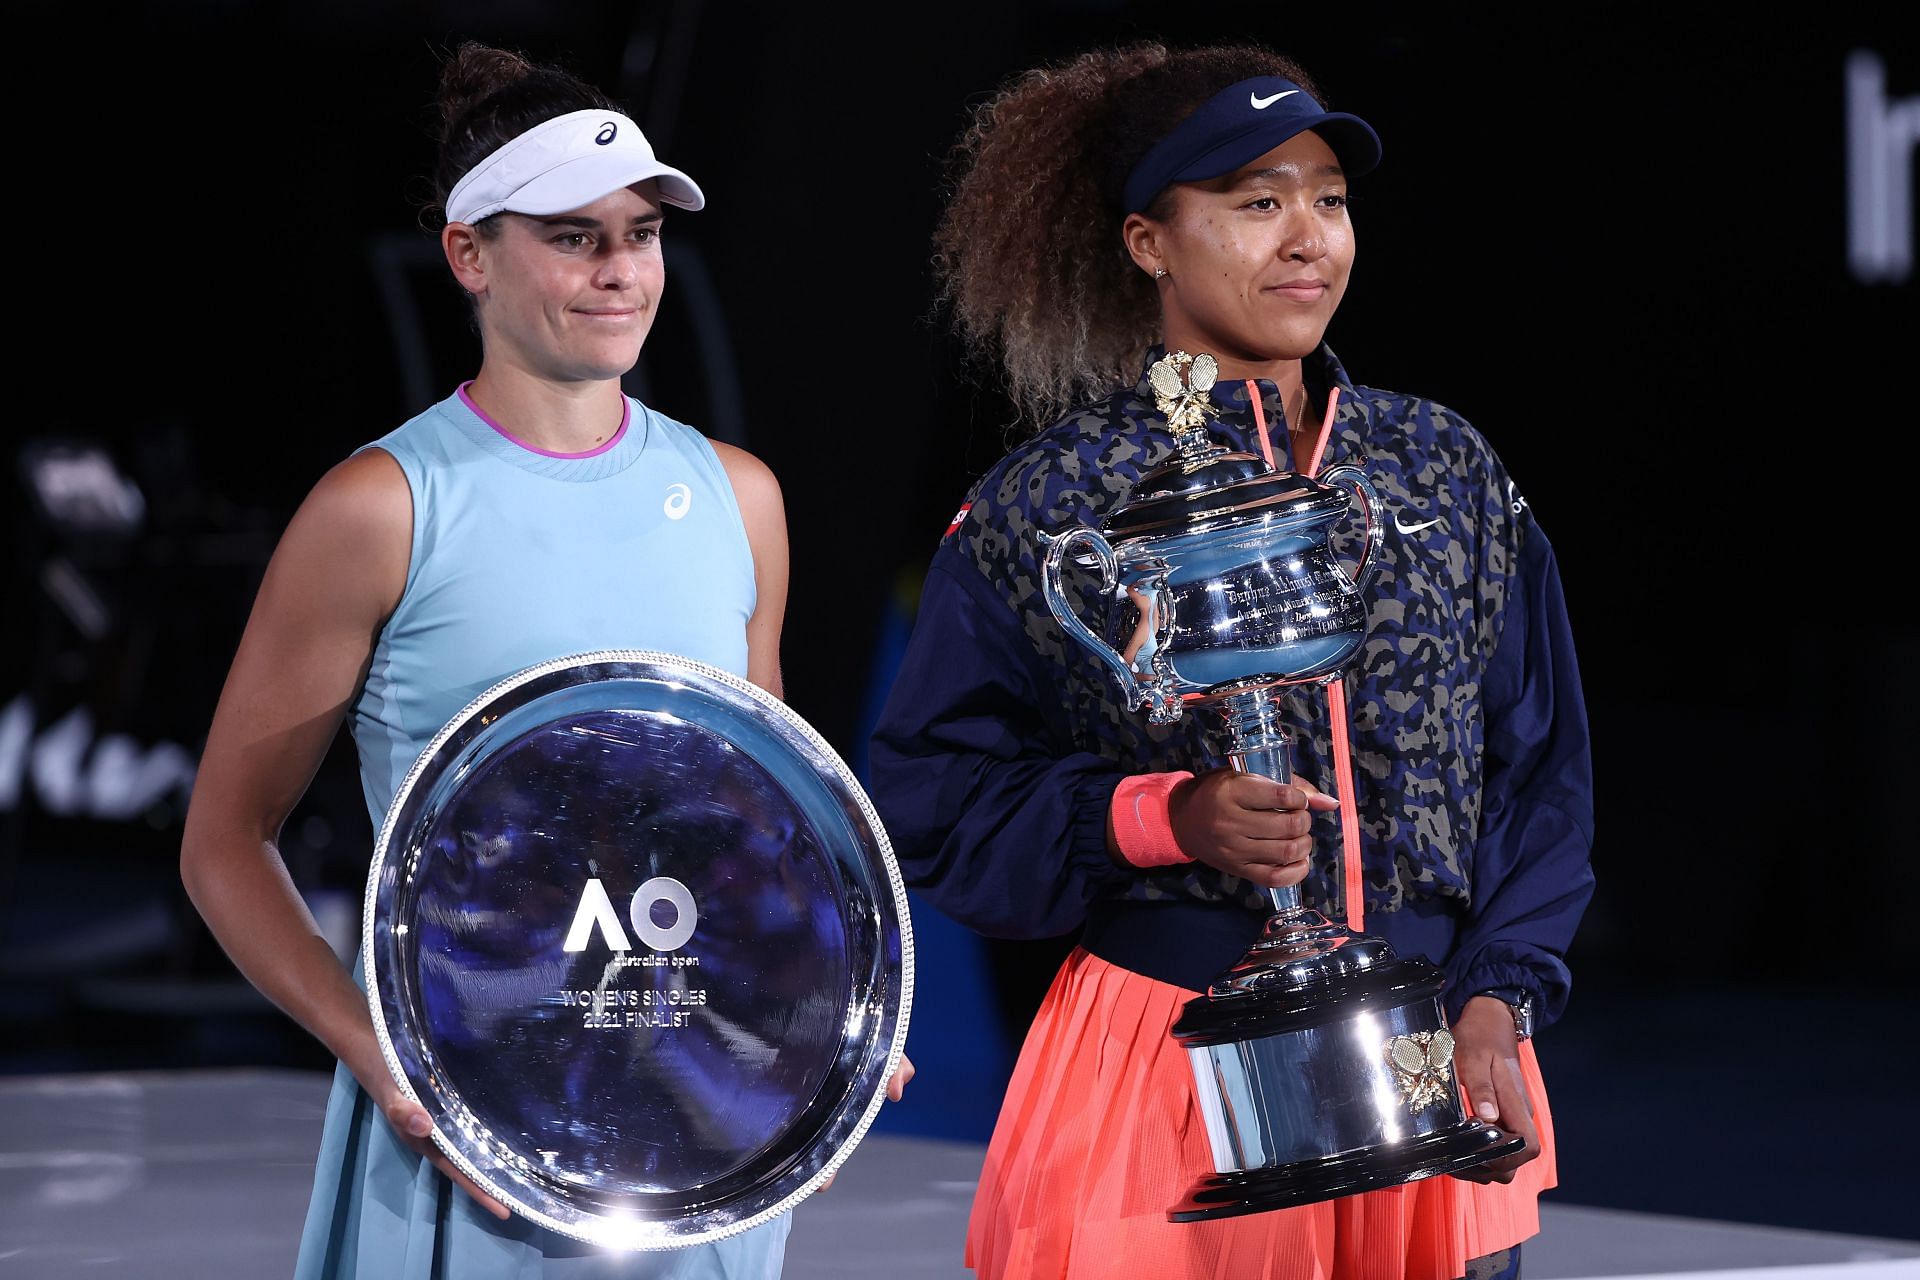 Jennifer Brady (L) and Naomi Osaka at the 2021 Australian Open with their respective trophies